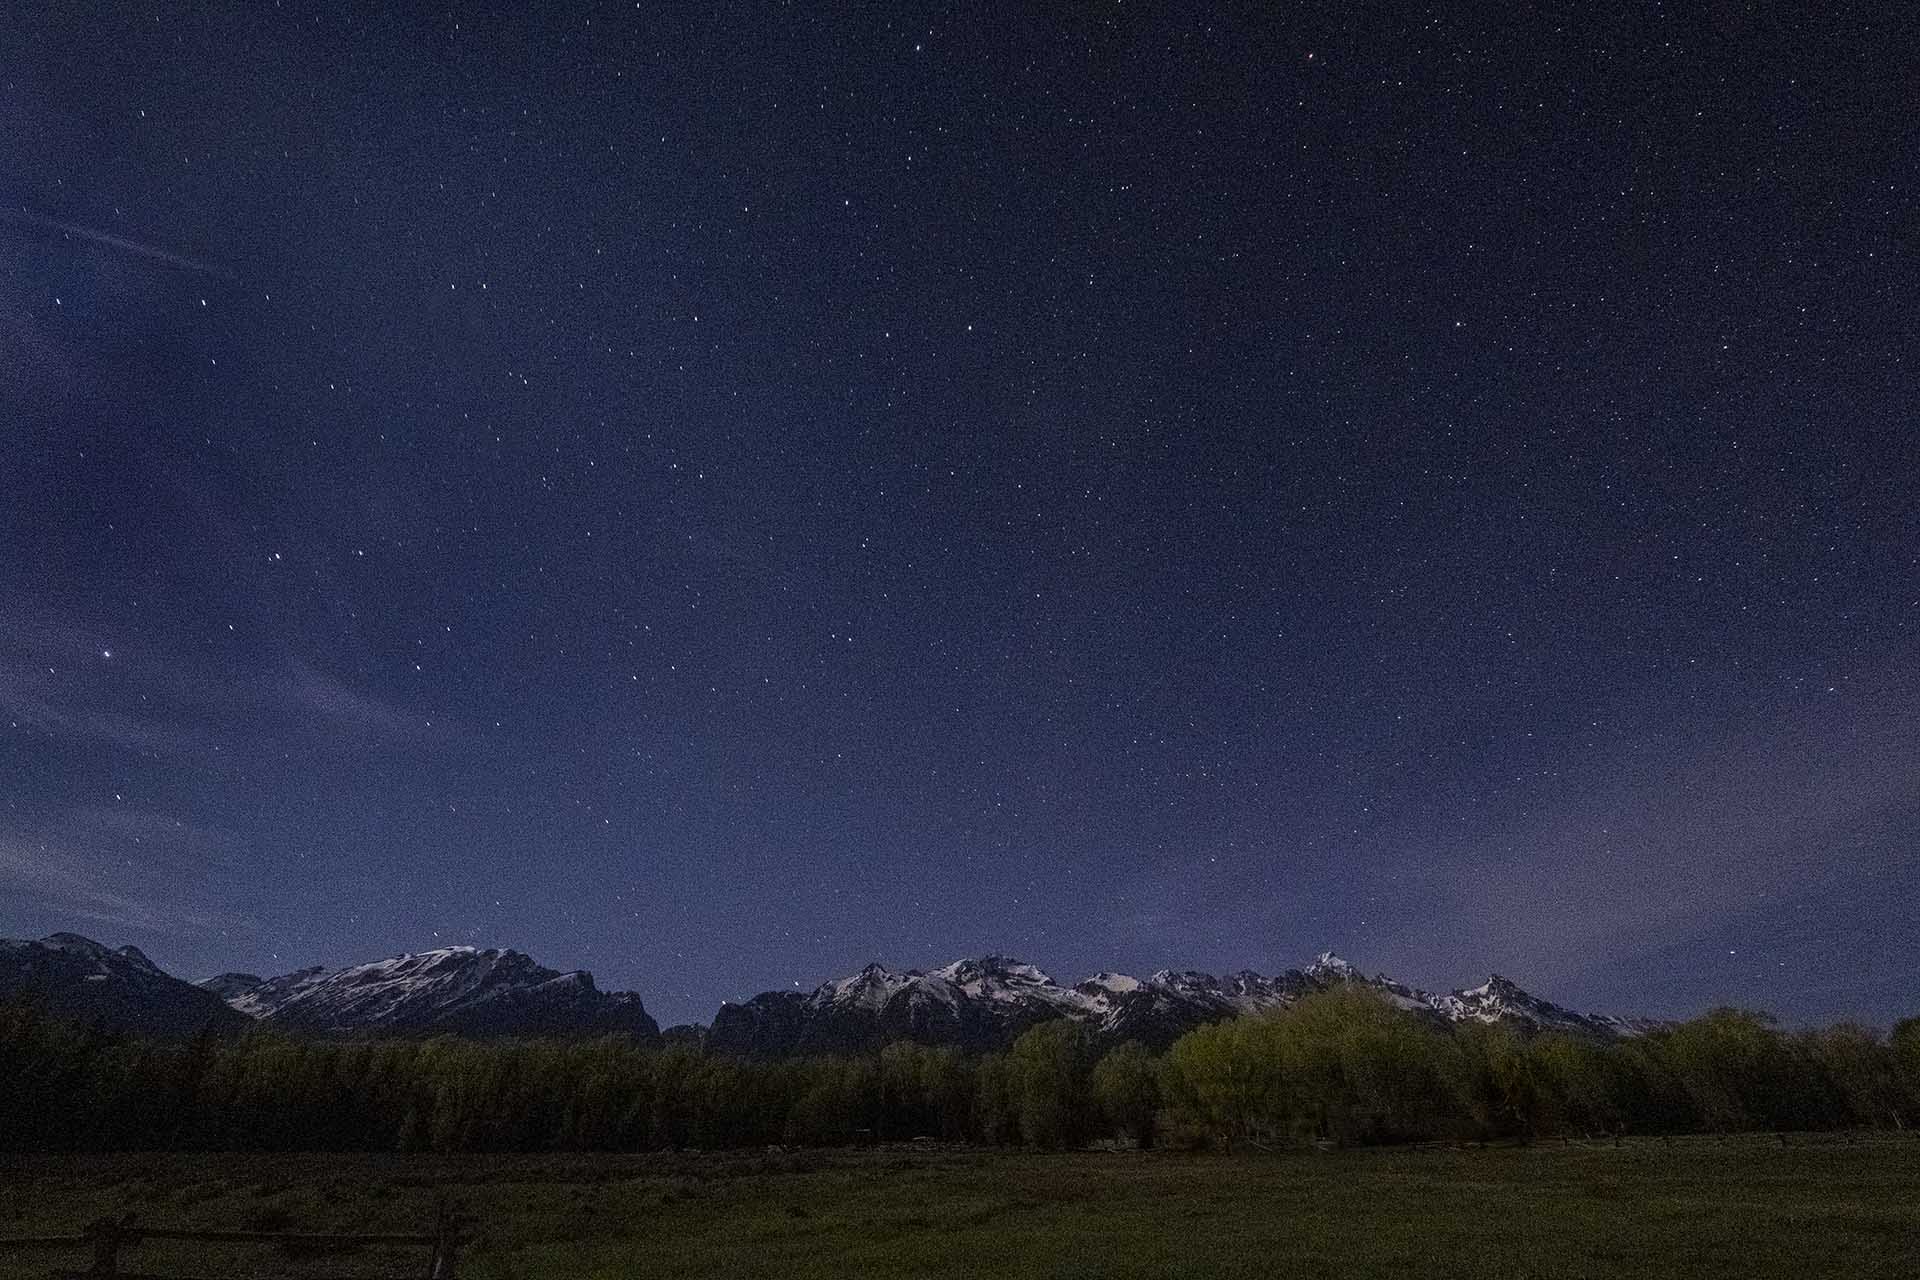 Starry Skies at the Jackson Hole Ranch